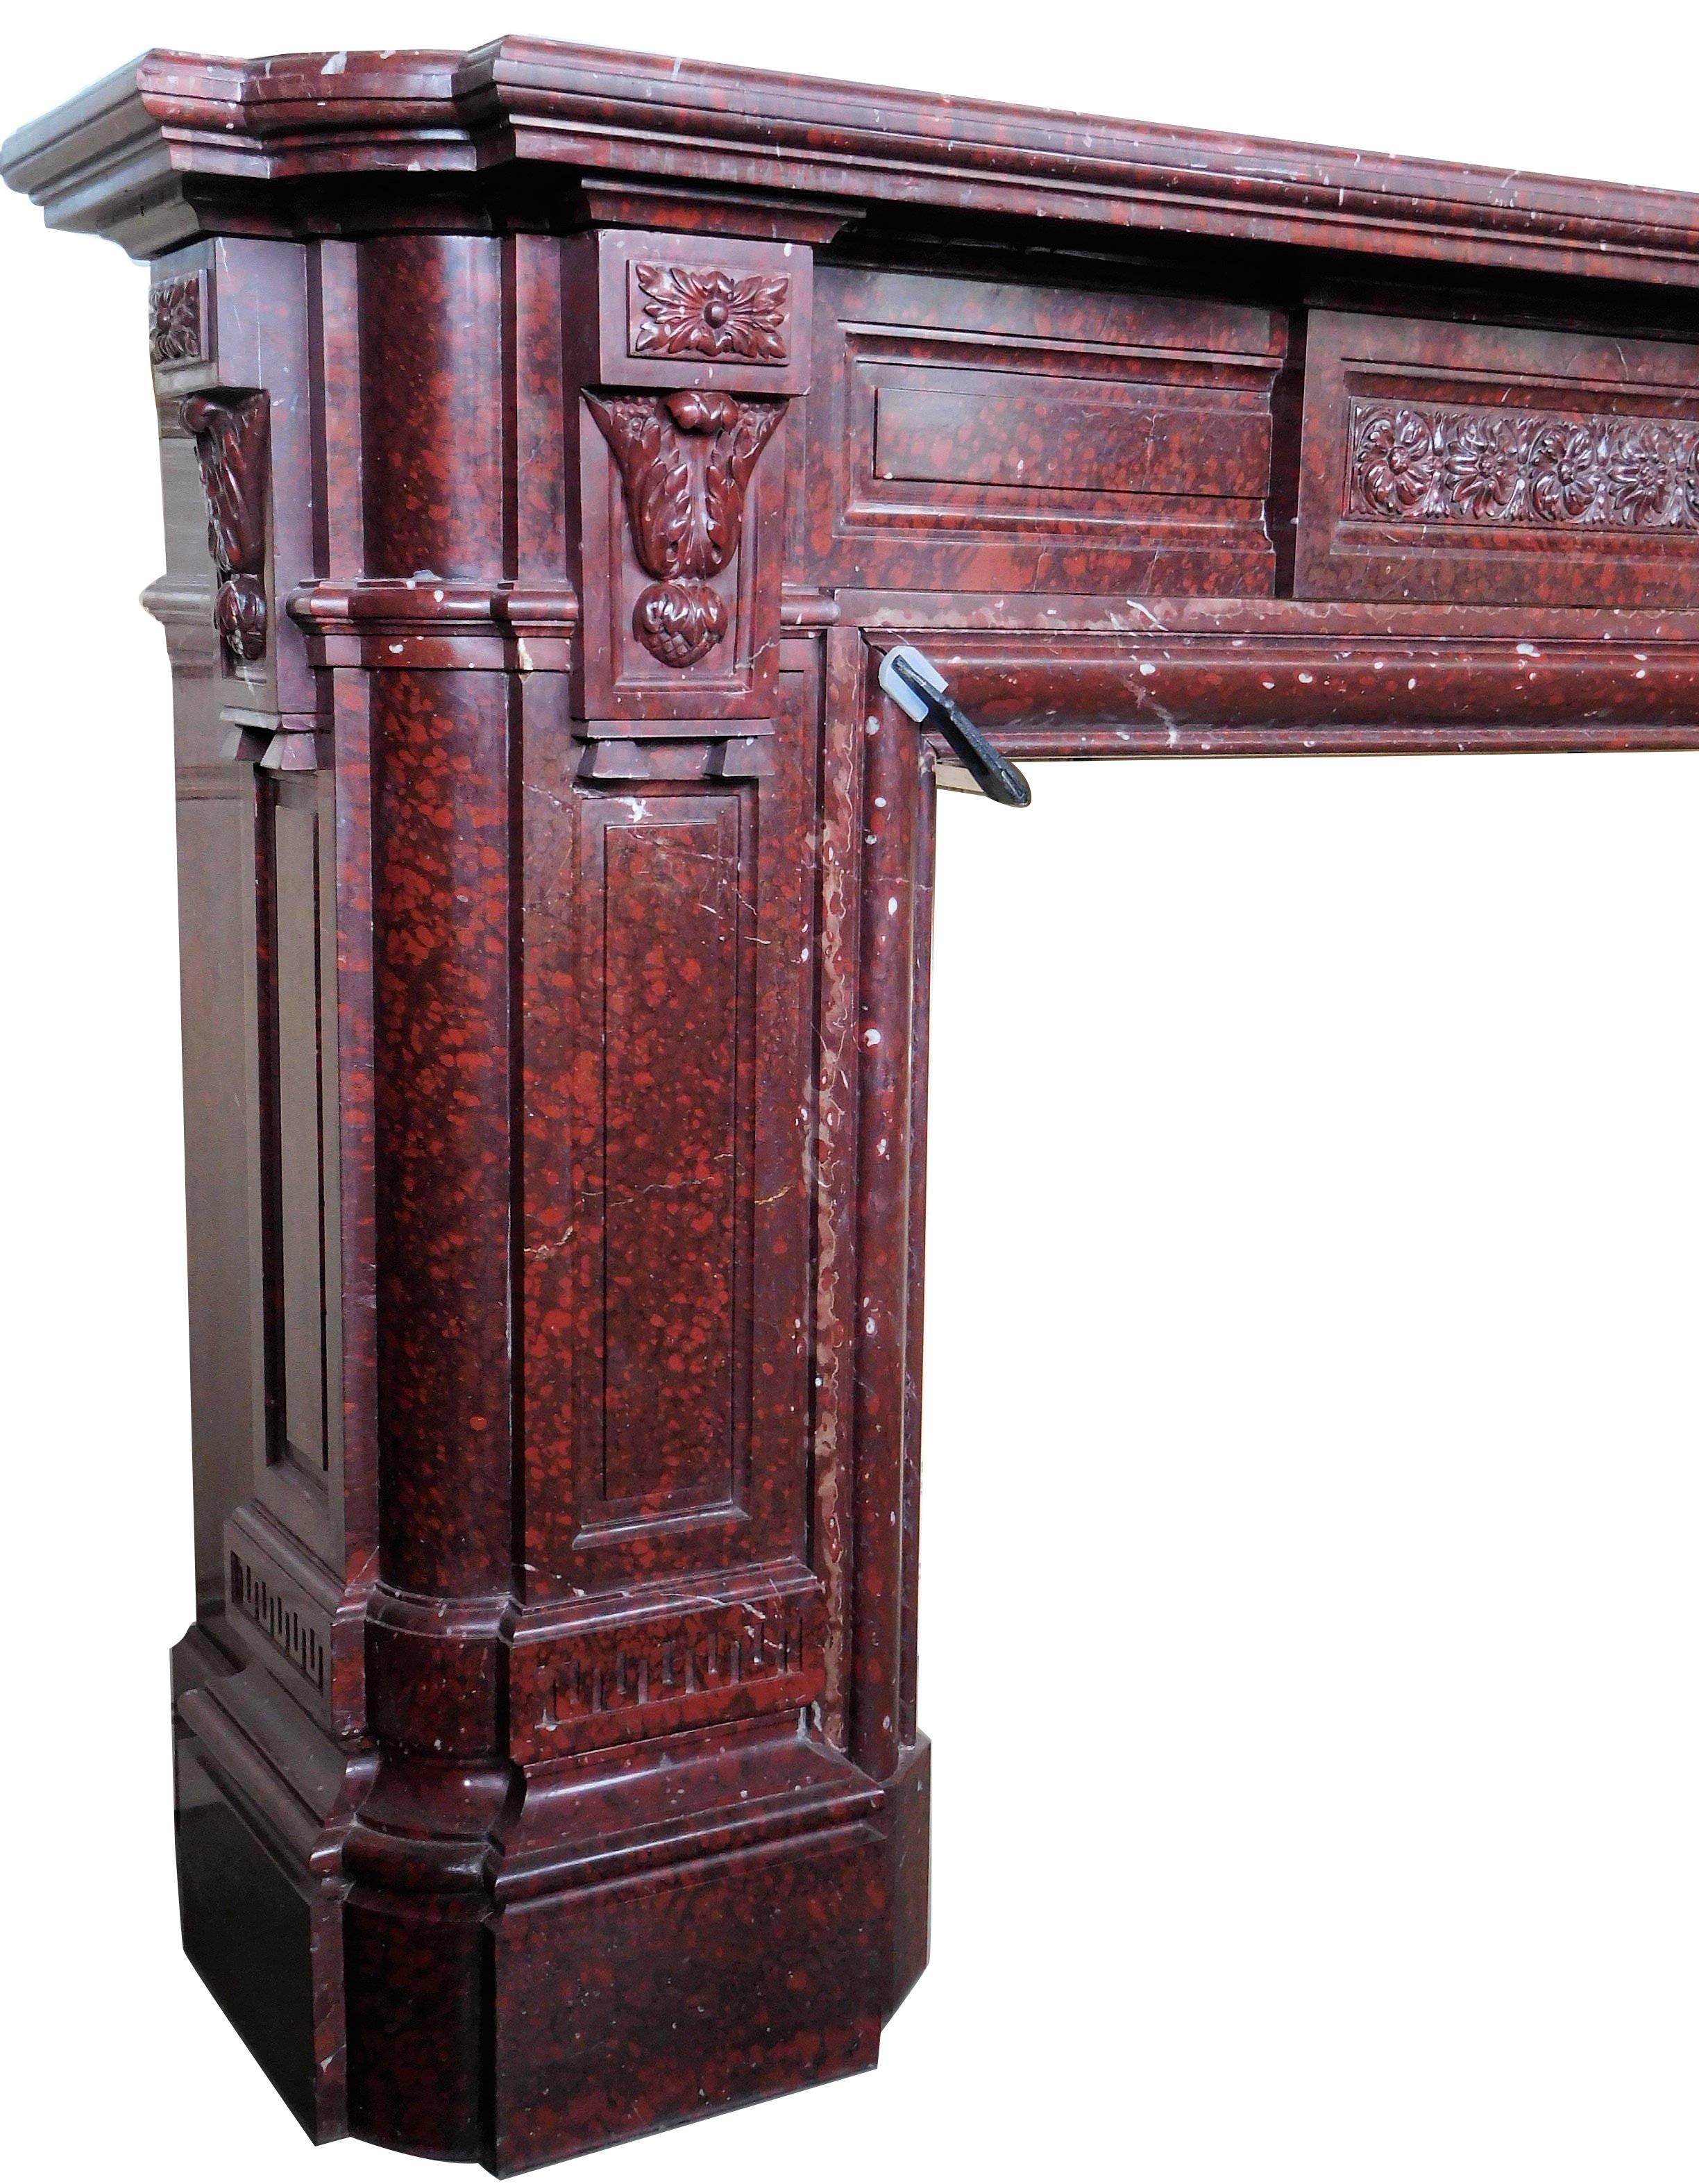 This impressive fireplace was made circa 1850 from the highly-valued Griotte Rouge marble.
This mantel features many fine carvings and various ornamentation, all over the front and jambs.
The jambs are carved both sides. This beautiful piece of